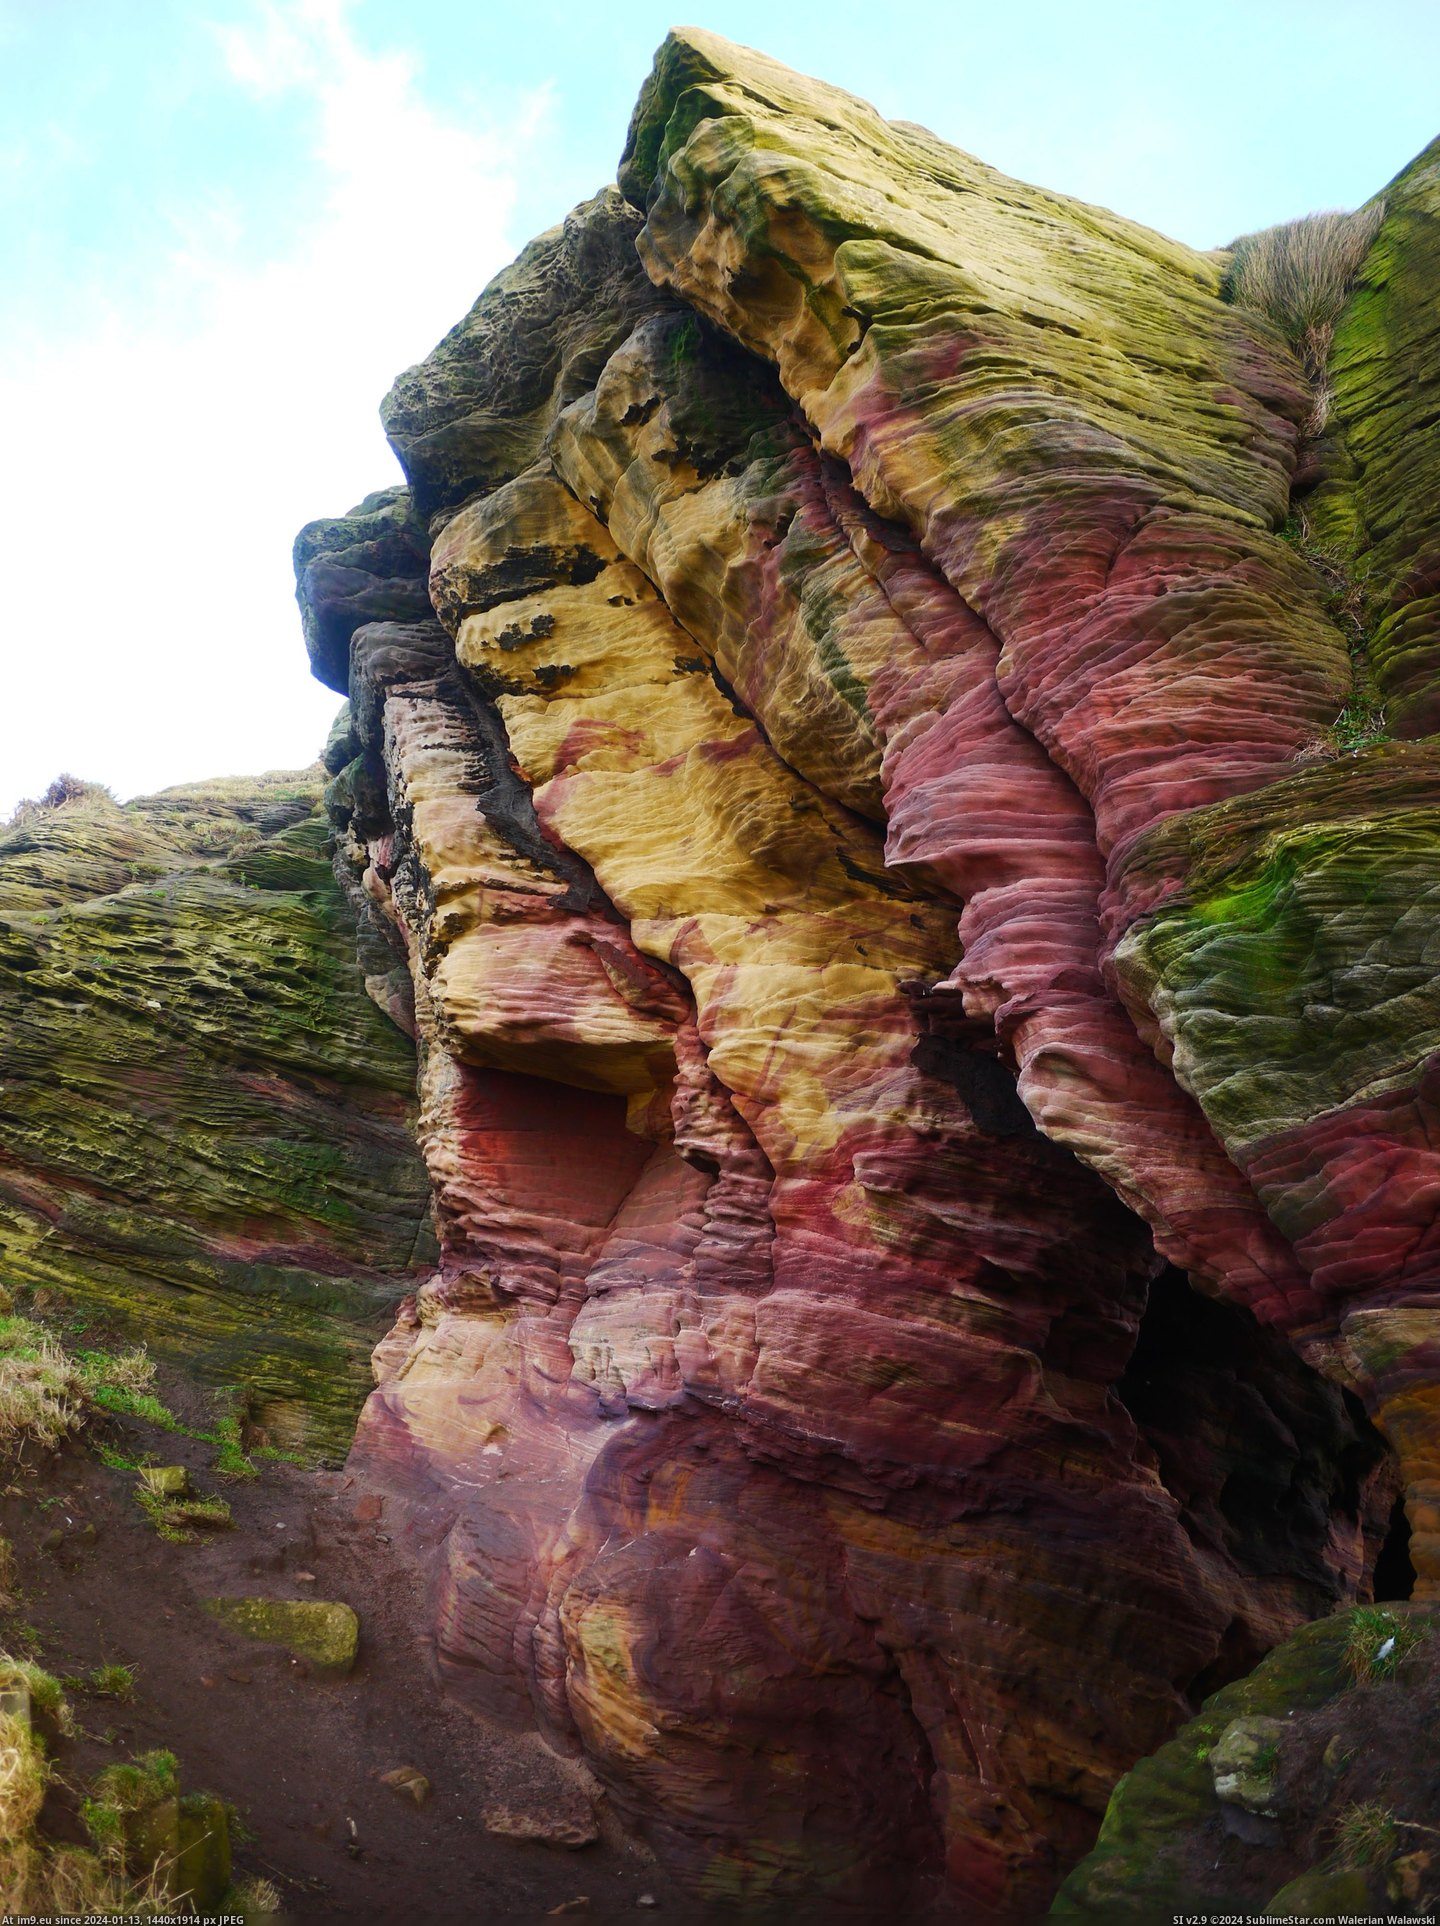 #Rock #Scotland #Anstruther #Colored #Formations [Earthporn] Colored rock formations near Anstruther, Scotland [3,000 x 4,000] [OC] Pic. (Obraz z album My r/EARTHPORN favs))